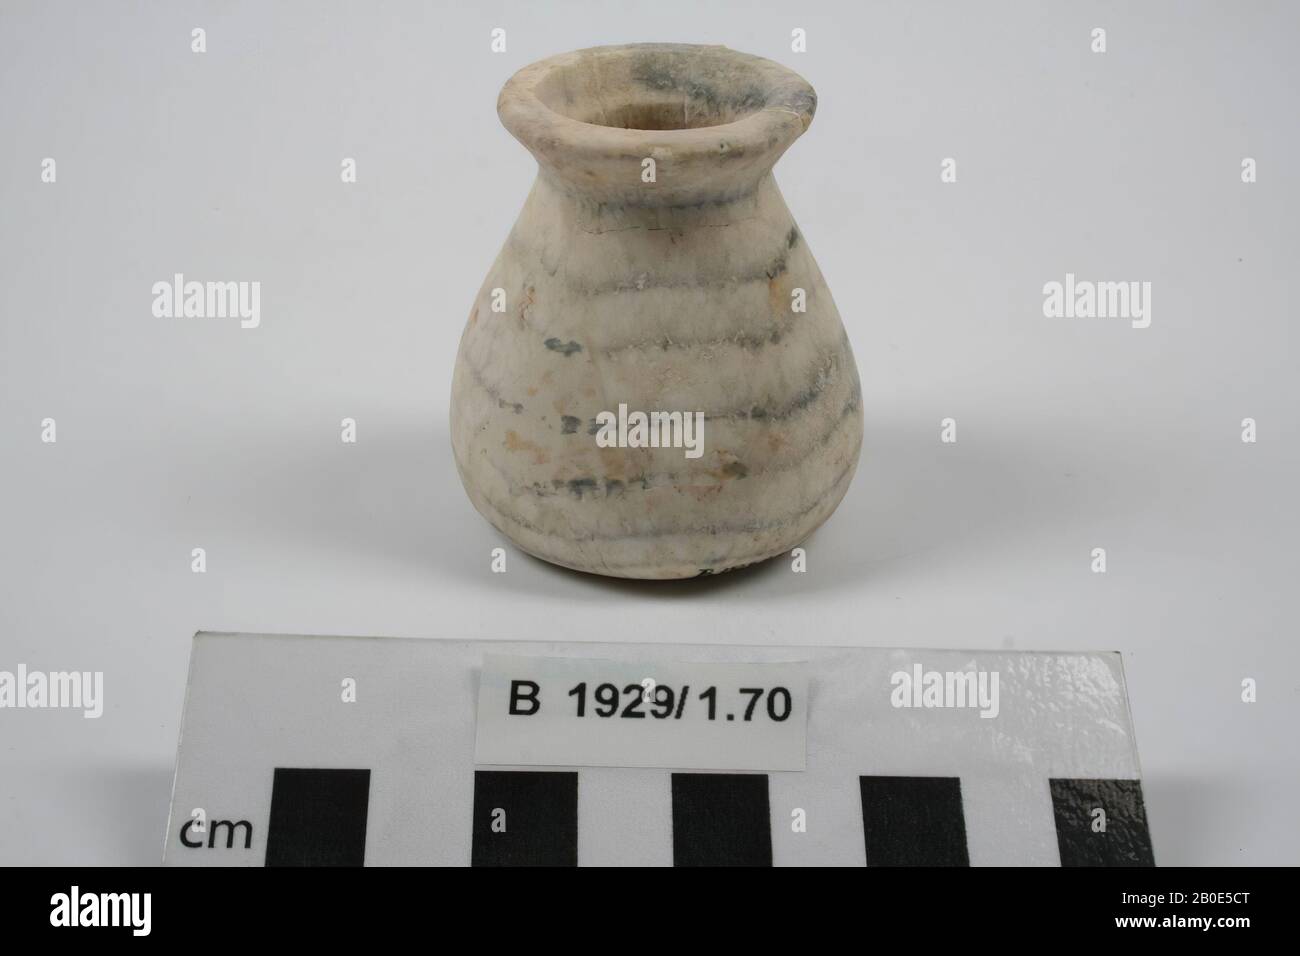 A complete jug made of alabaster with a strong outward edge. The jug has a flat bottom., Crockery, stone, alabaster, H 6.3 cm, D 5.6 cm, D edge 3.5 cm, 2nd millennium BC, Palestine Stock Photo